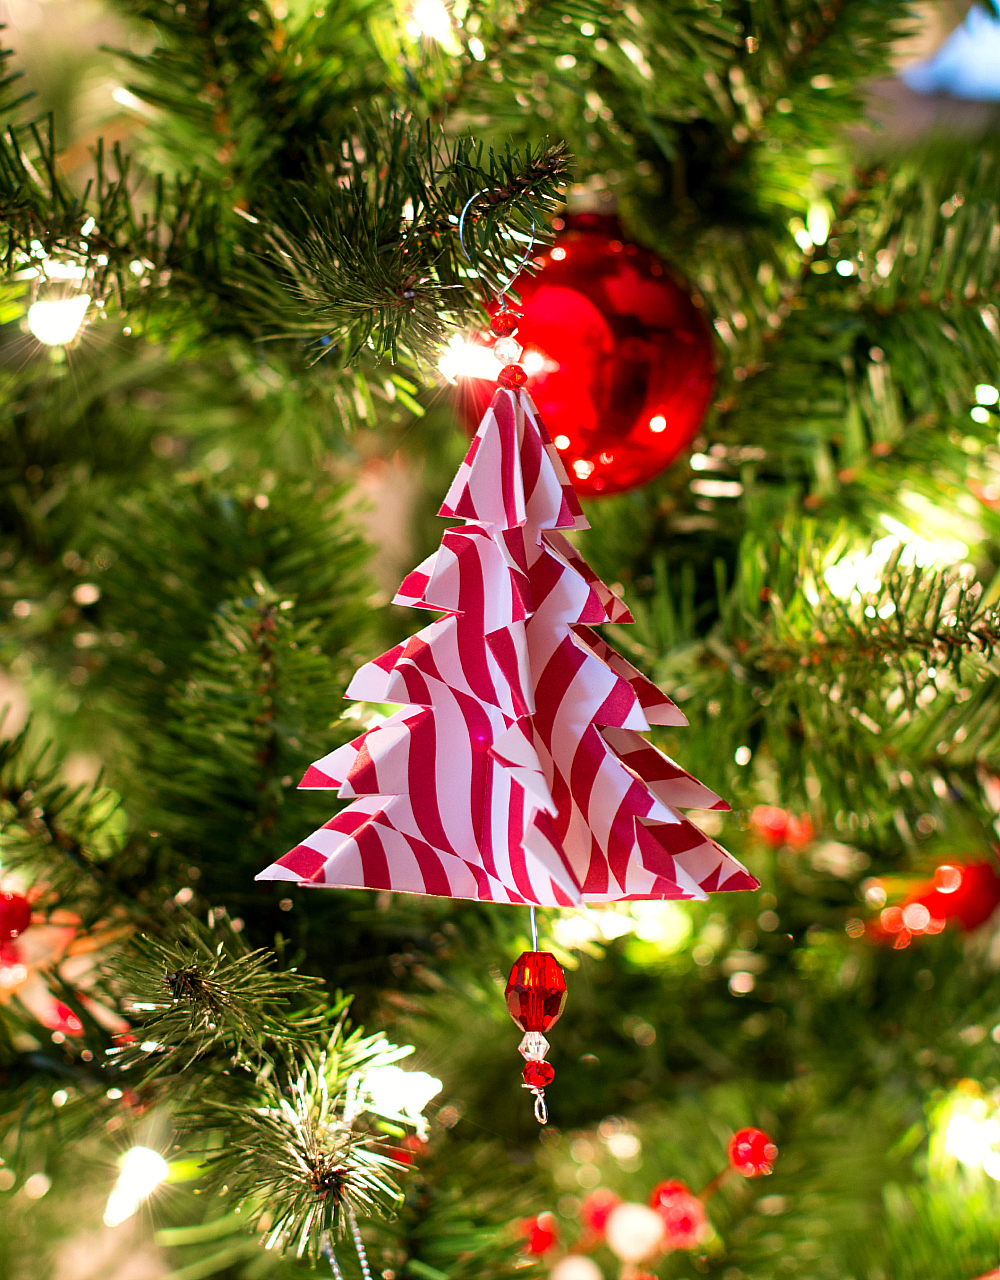 25 Easy Paper Christmas Ornaments You Can Make at Home - MagMent